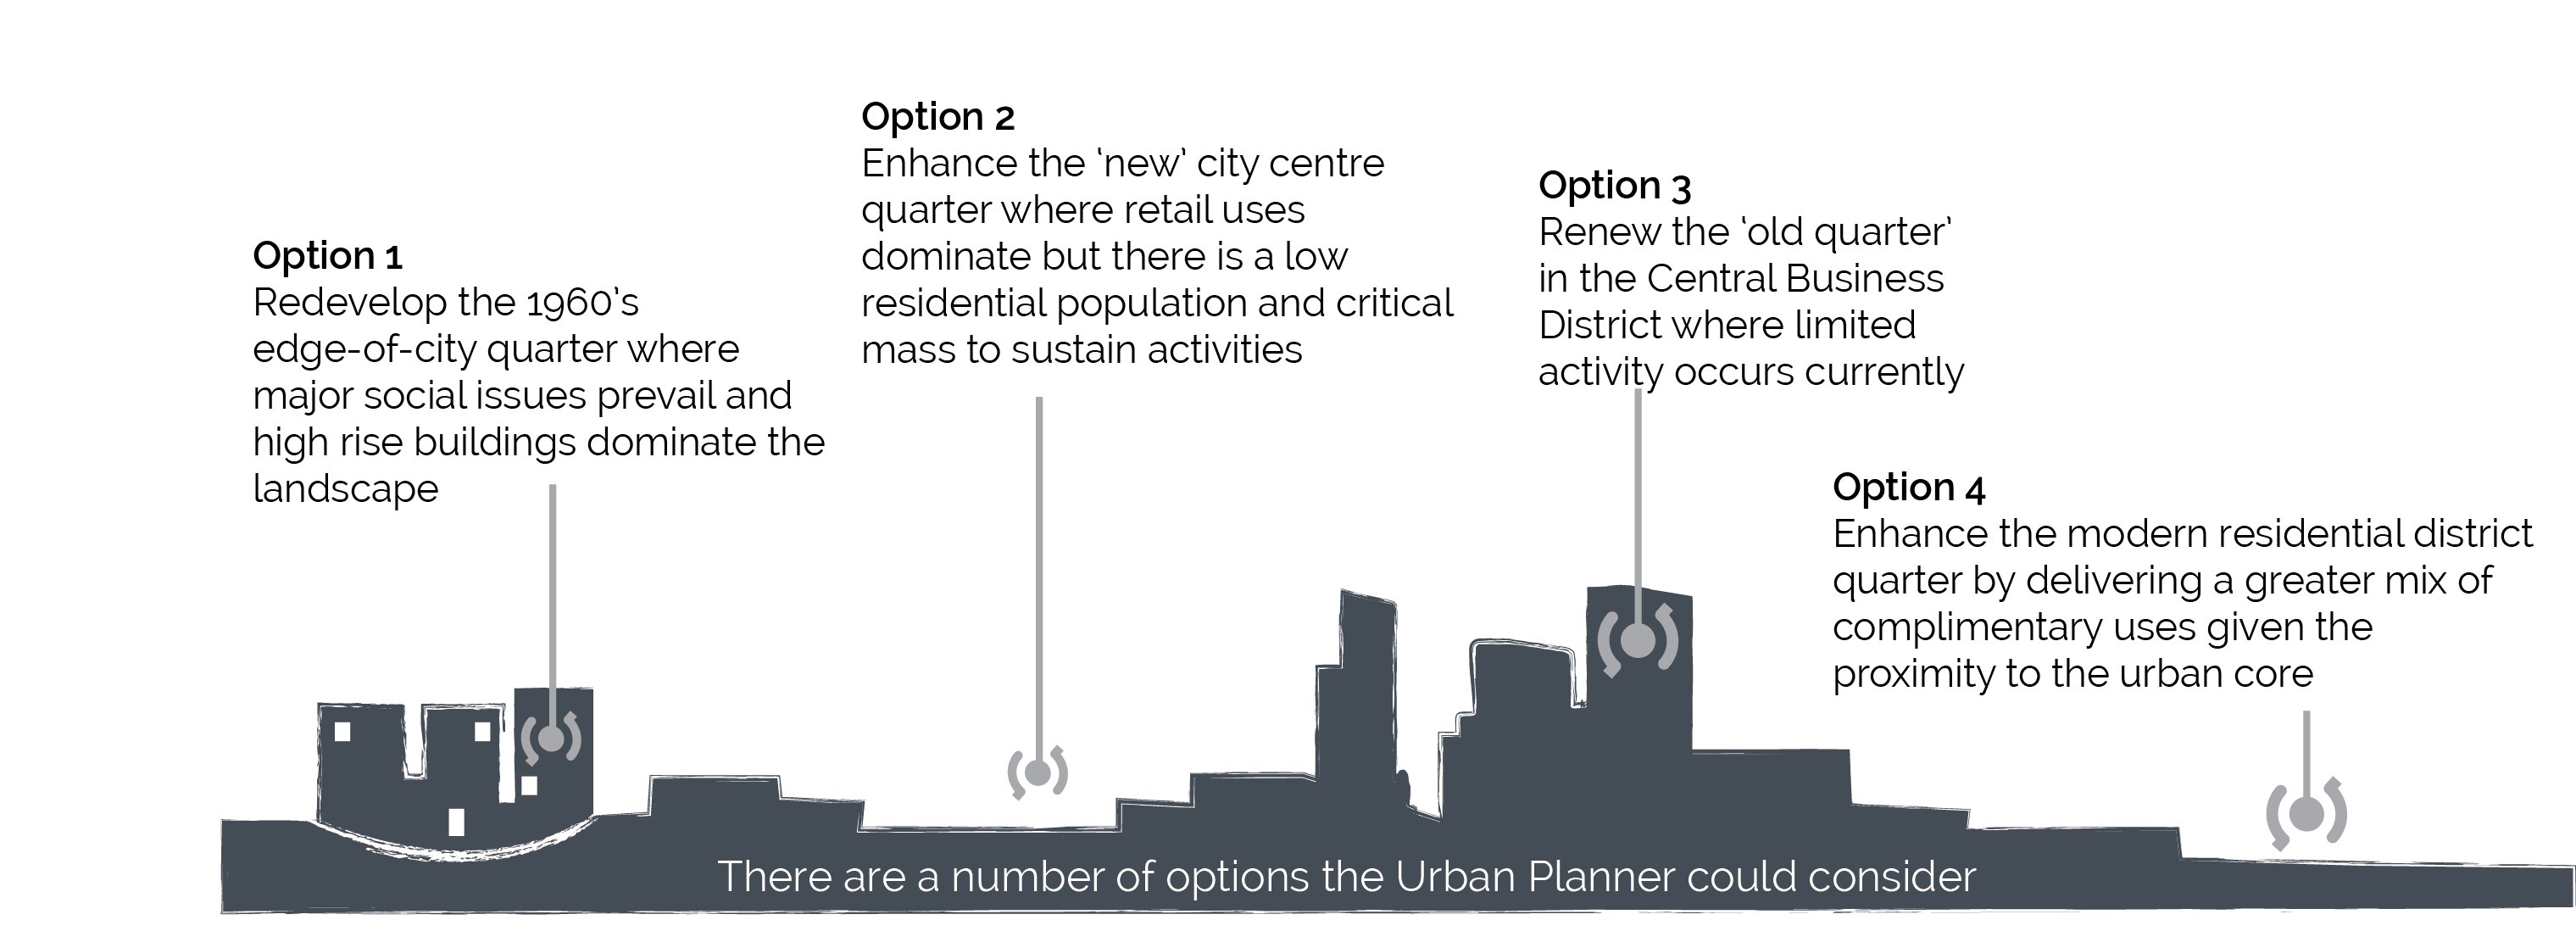 In this example scenario, there are a number of options the Urban Planner could consider